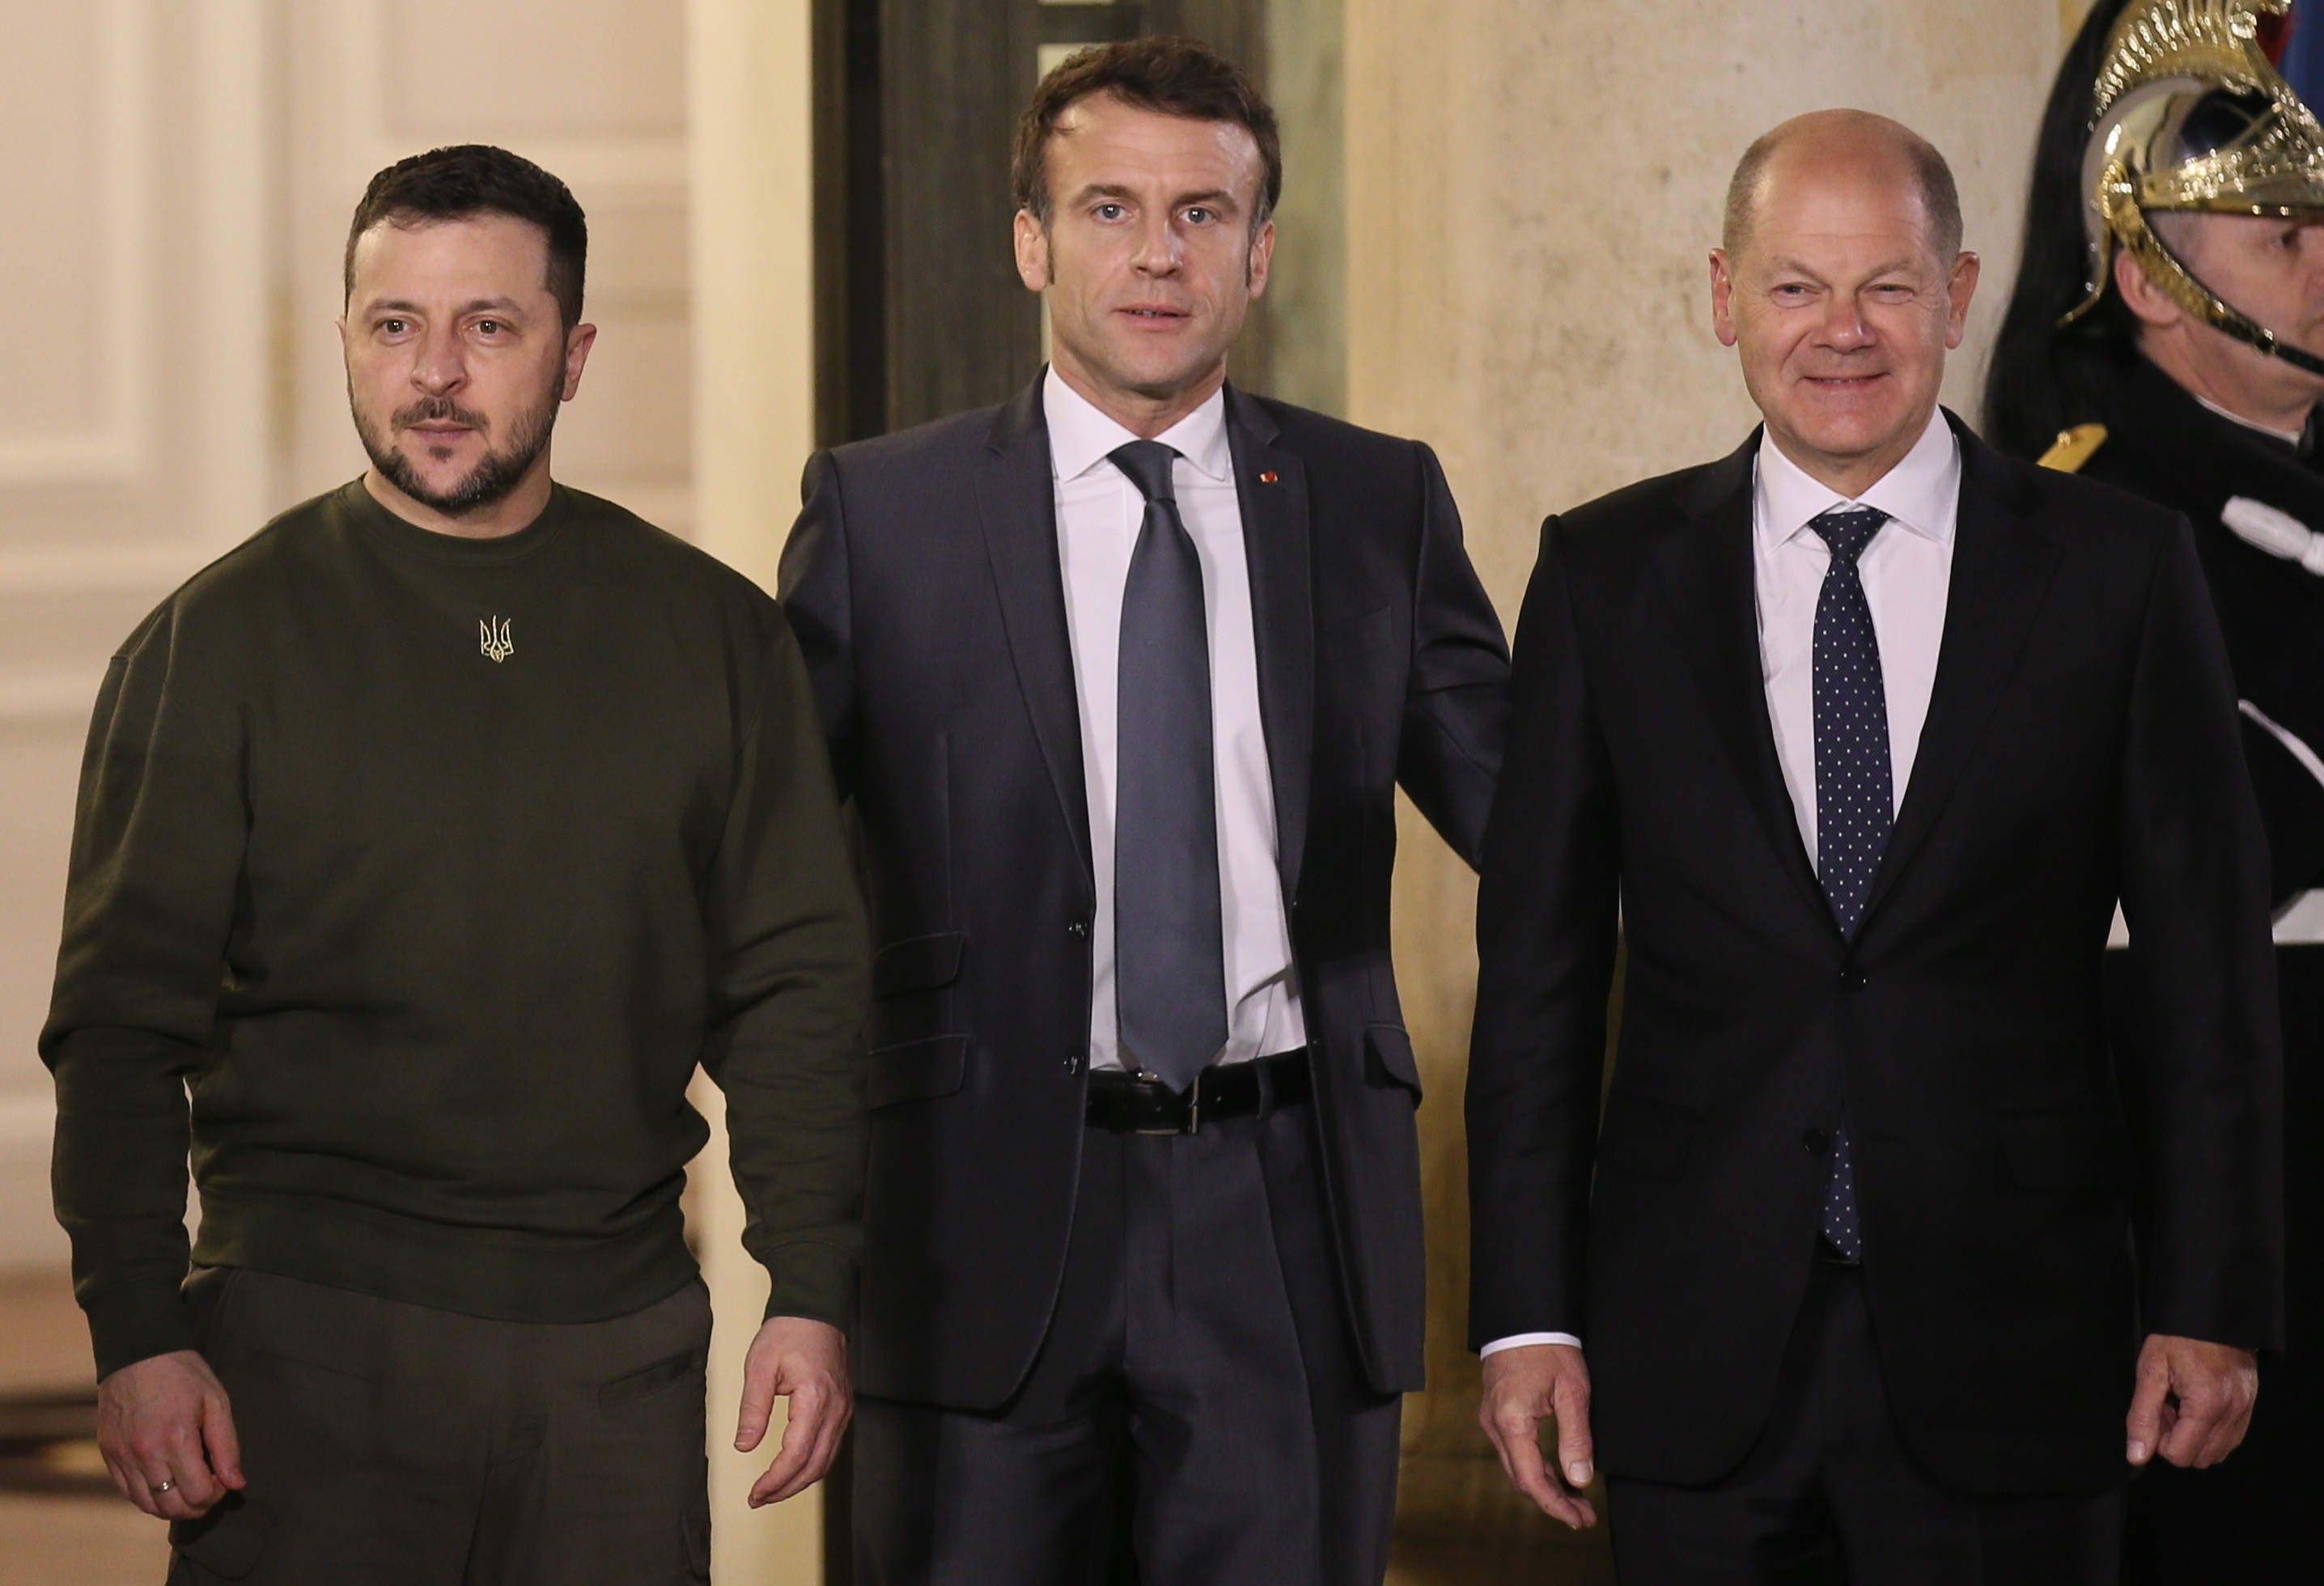 Left: President Zelenskyy wearing his signature army green sweatshirt and pants. Center: President Macron, wearing a black suit. Right: German Chancellor Scholz wearing a black suit and smiling.